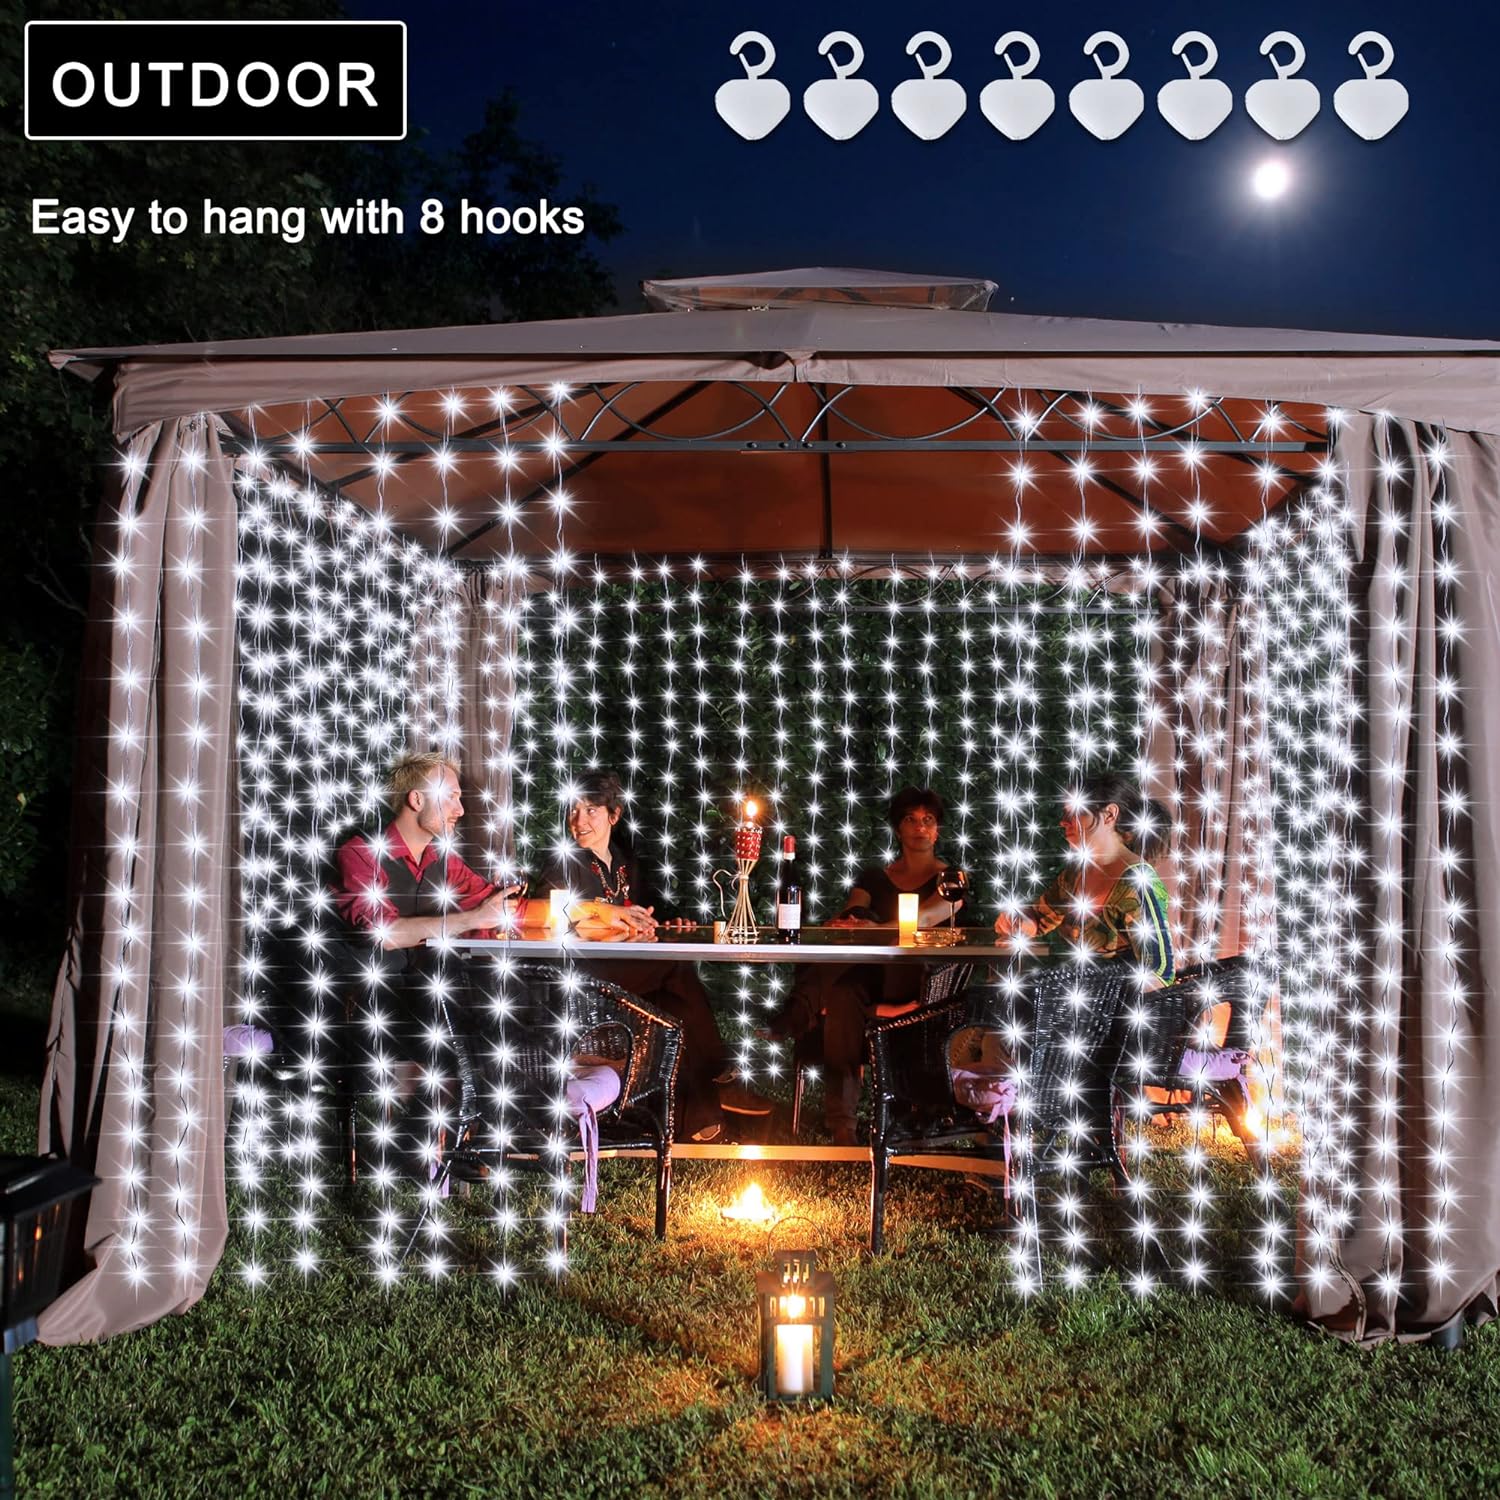 200/300 LED USB Curtain Fairy String Lights with 8 Modes Remote Control Timer_13